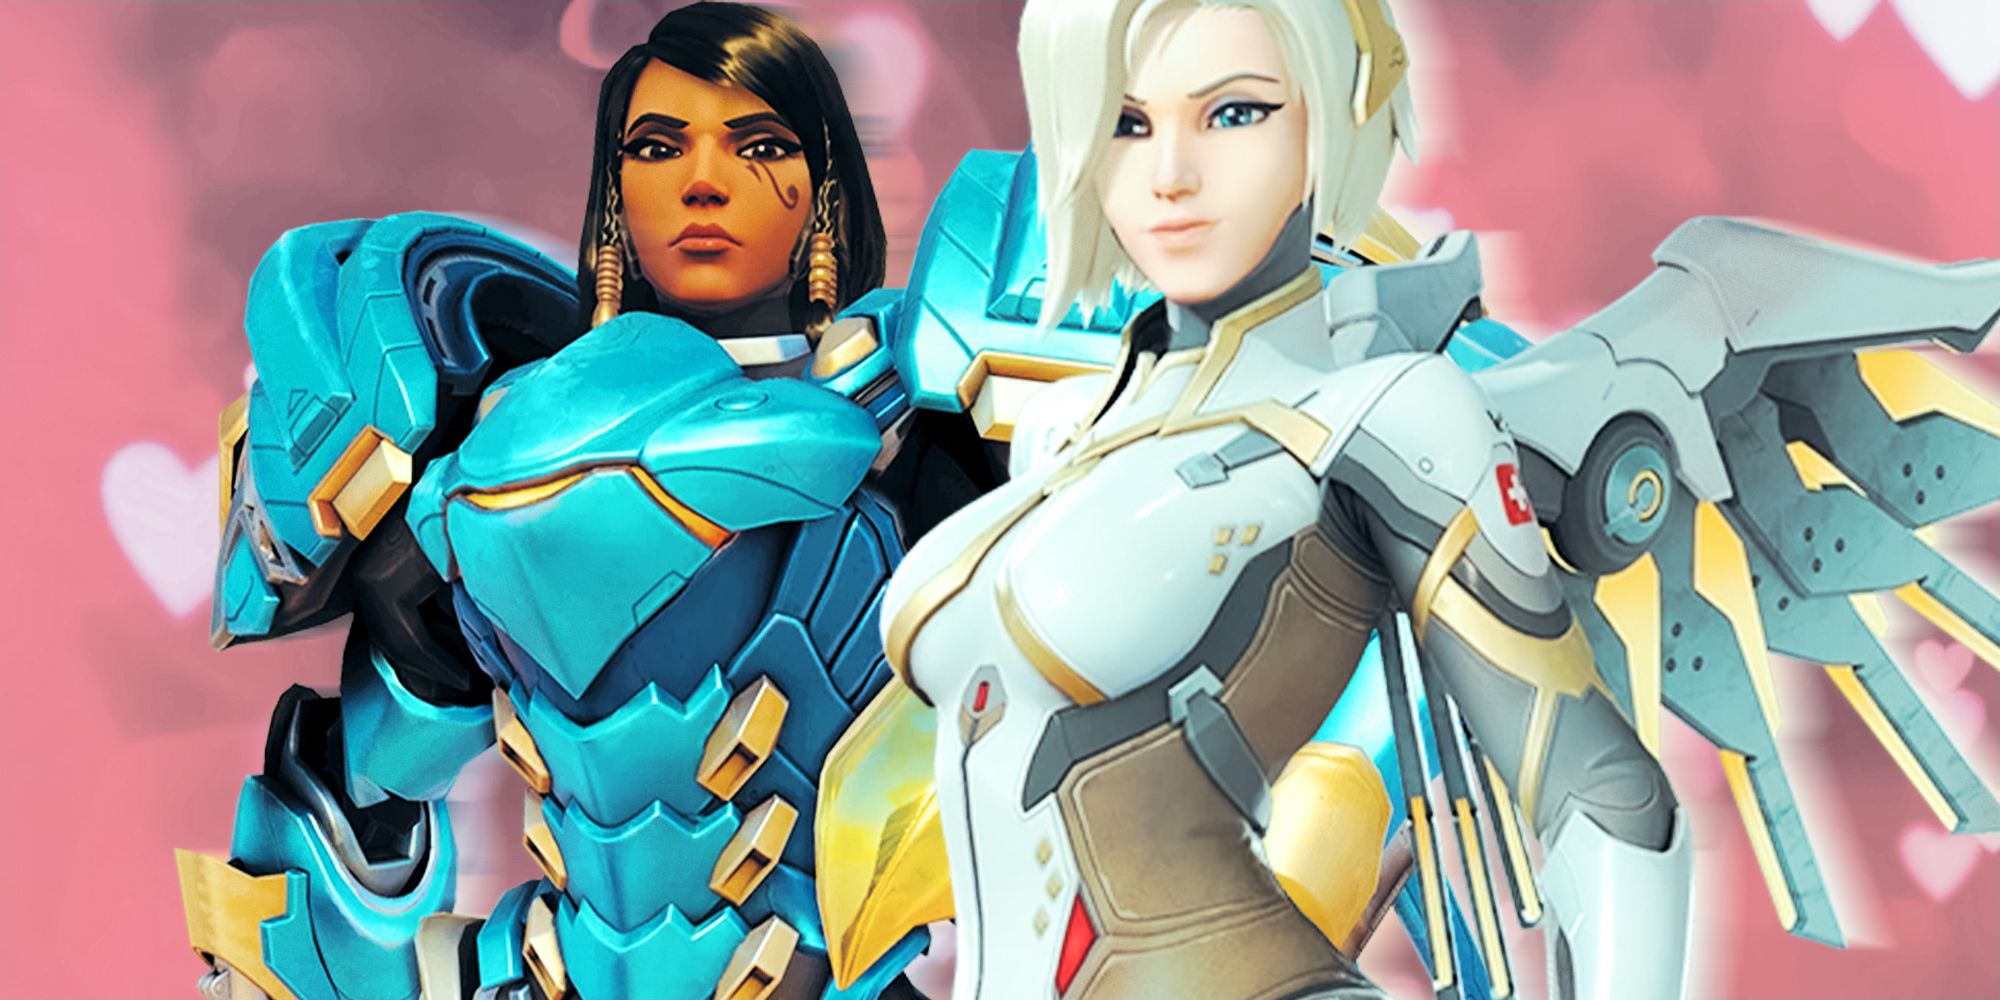 ck jones recommends pharah and mercy comic pic